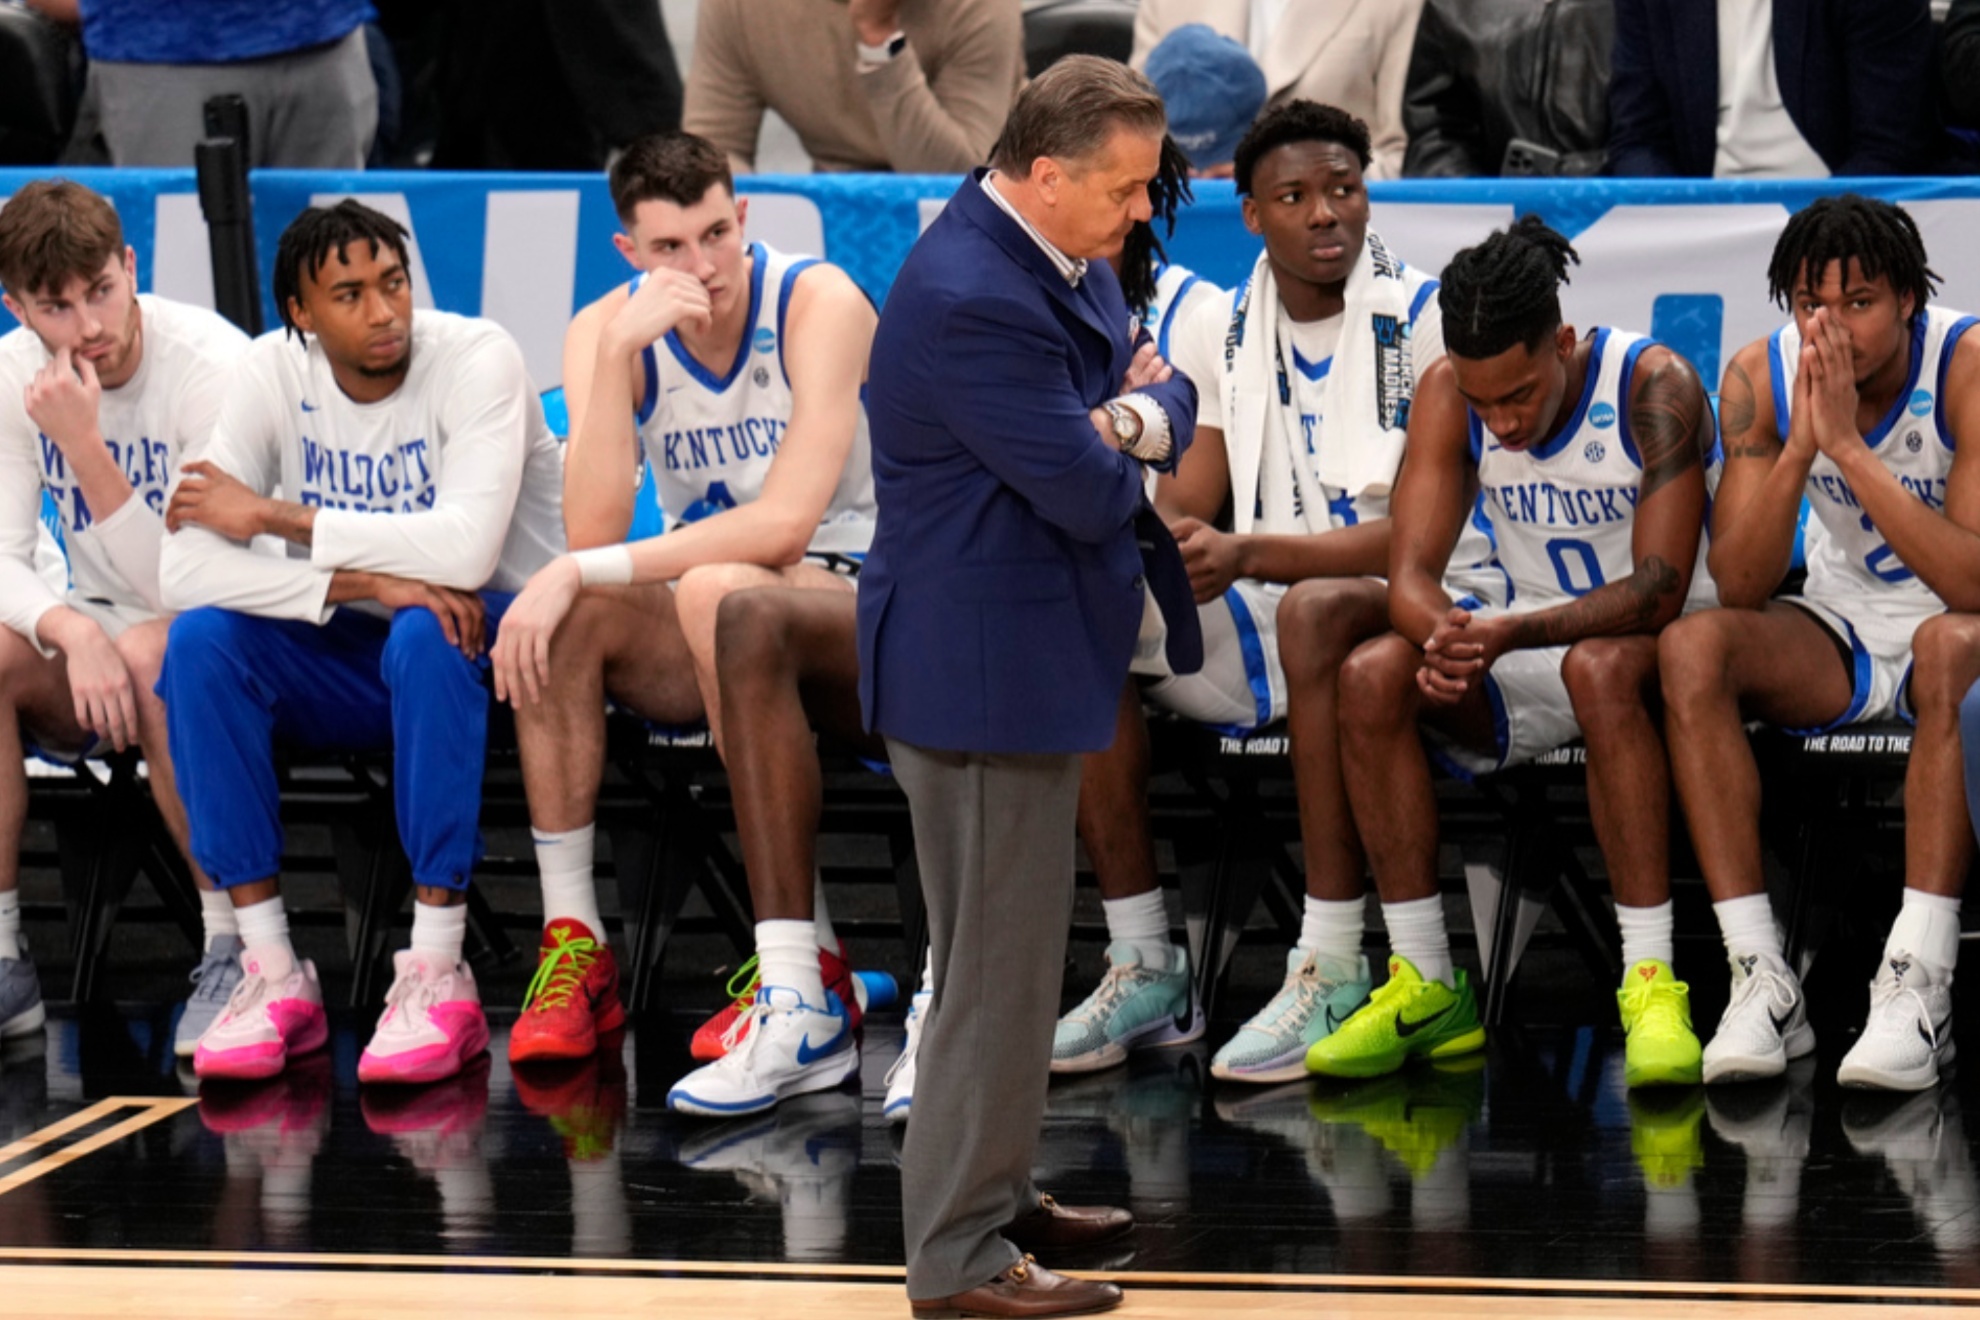 Kentucky suffered a shocking defeat in the first round of the NCAA Tournament